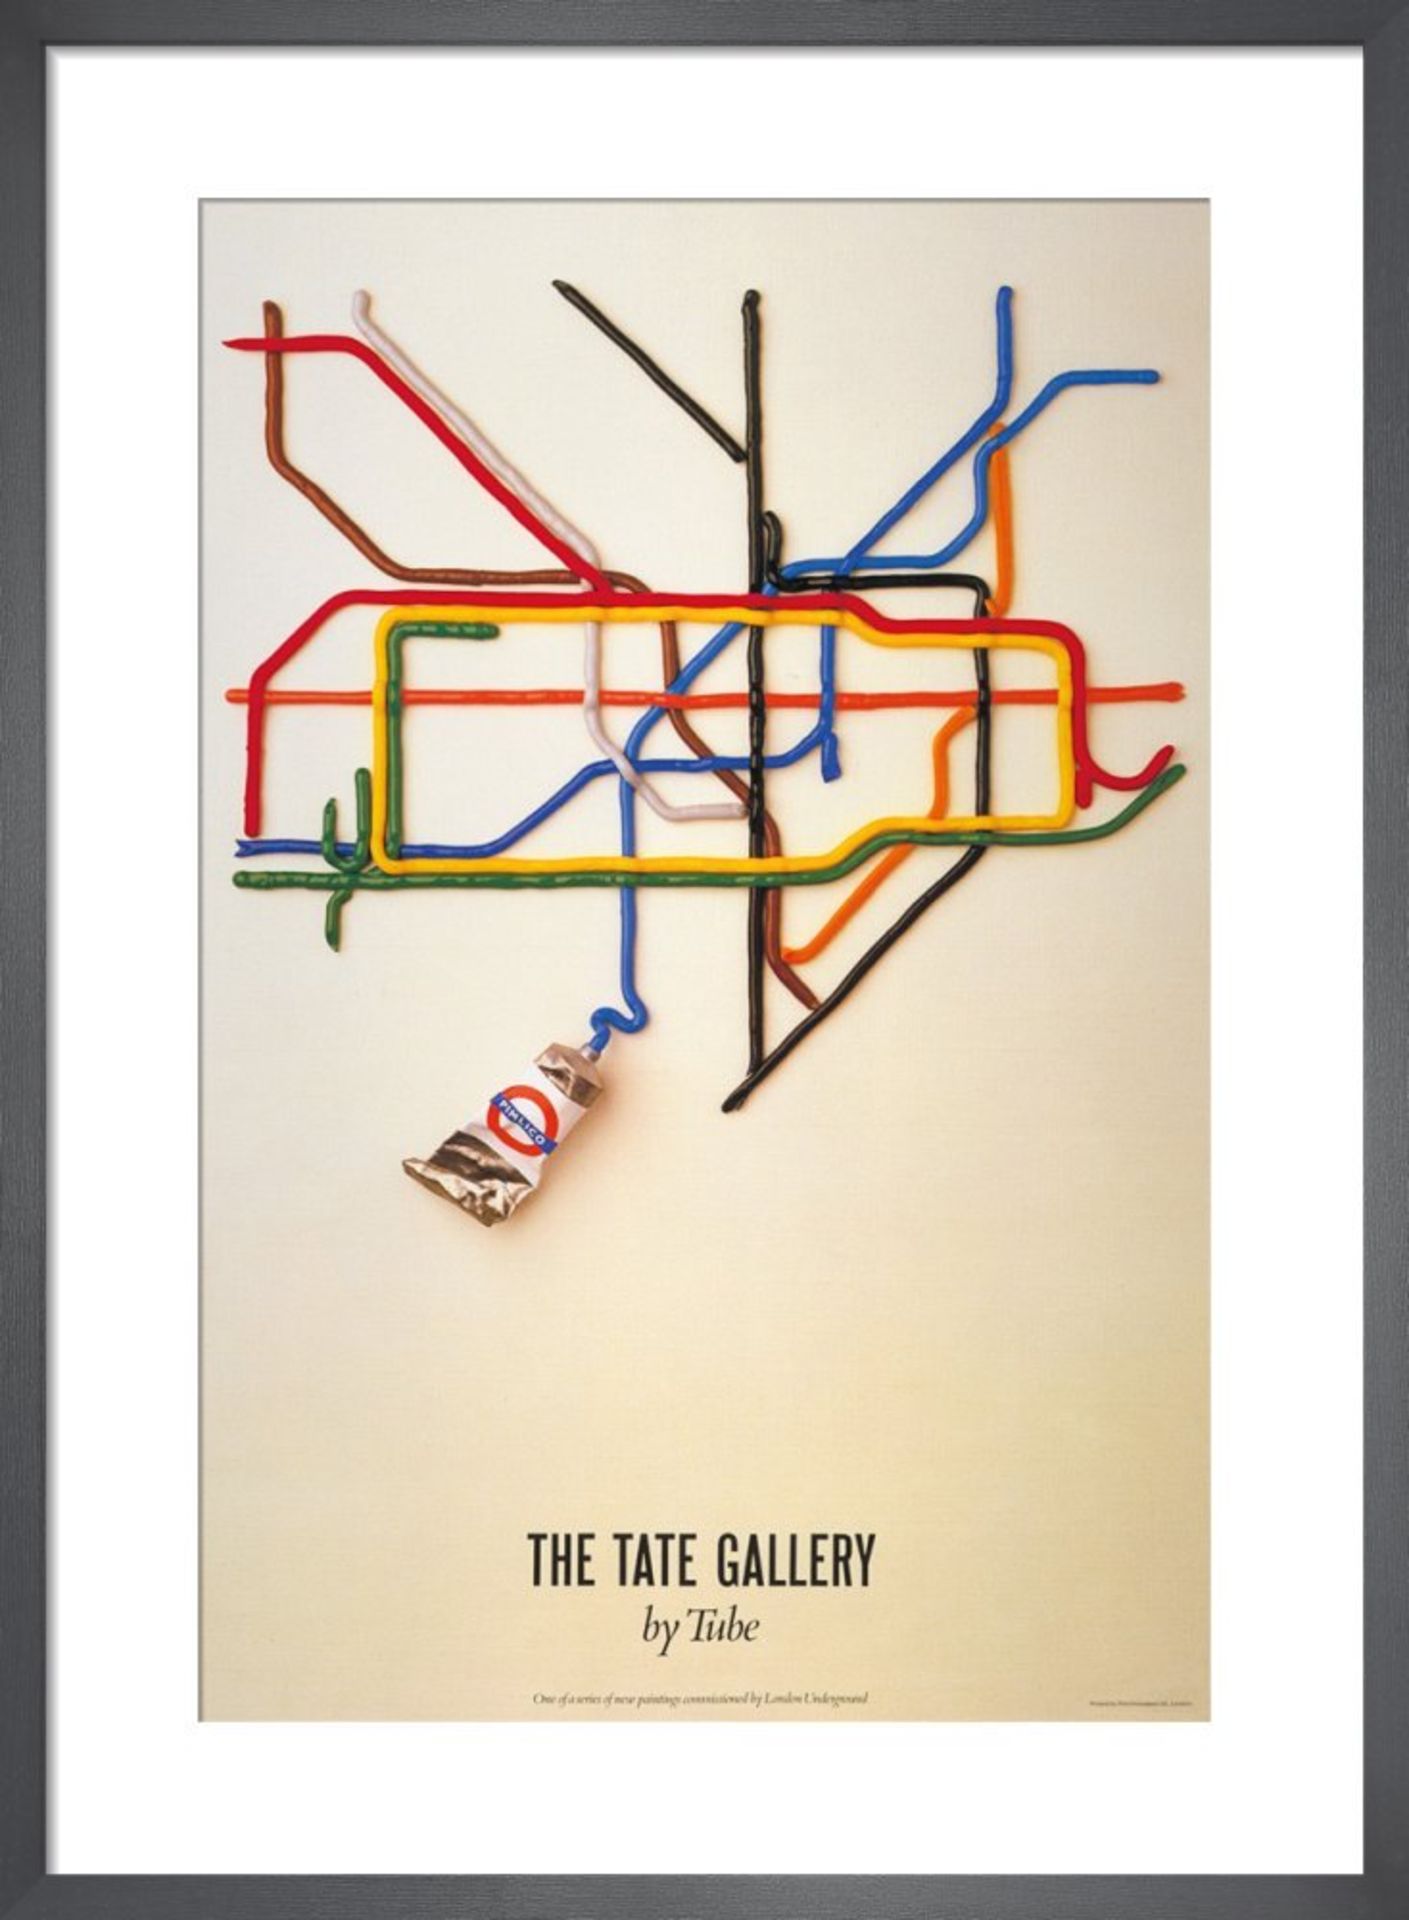 David Booth, Malcolm and Nancy Fowler Tate Gallery by tube, 1986 Framed Print, Responsibly Sourced